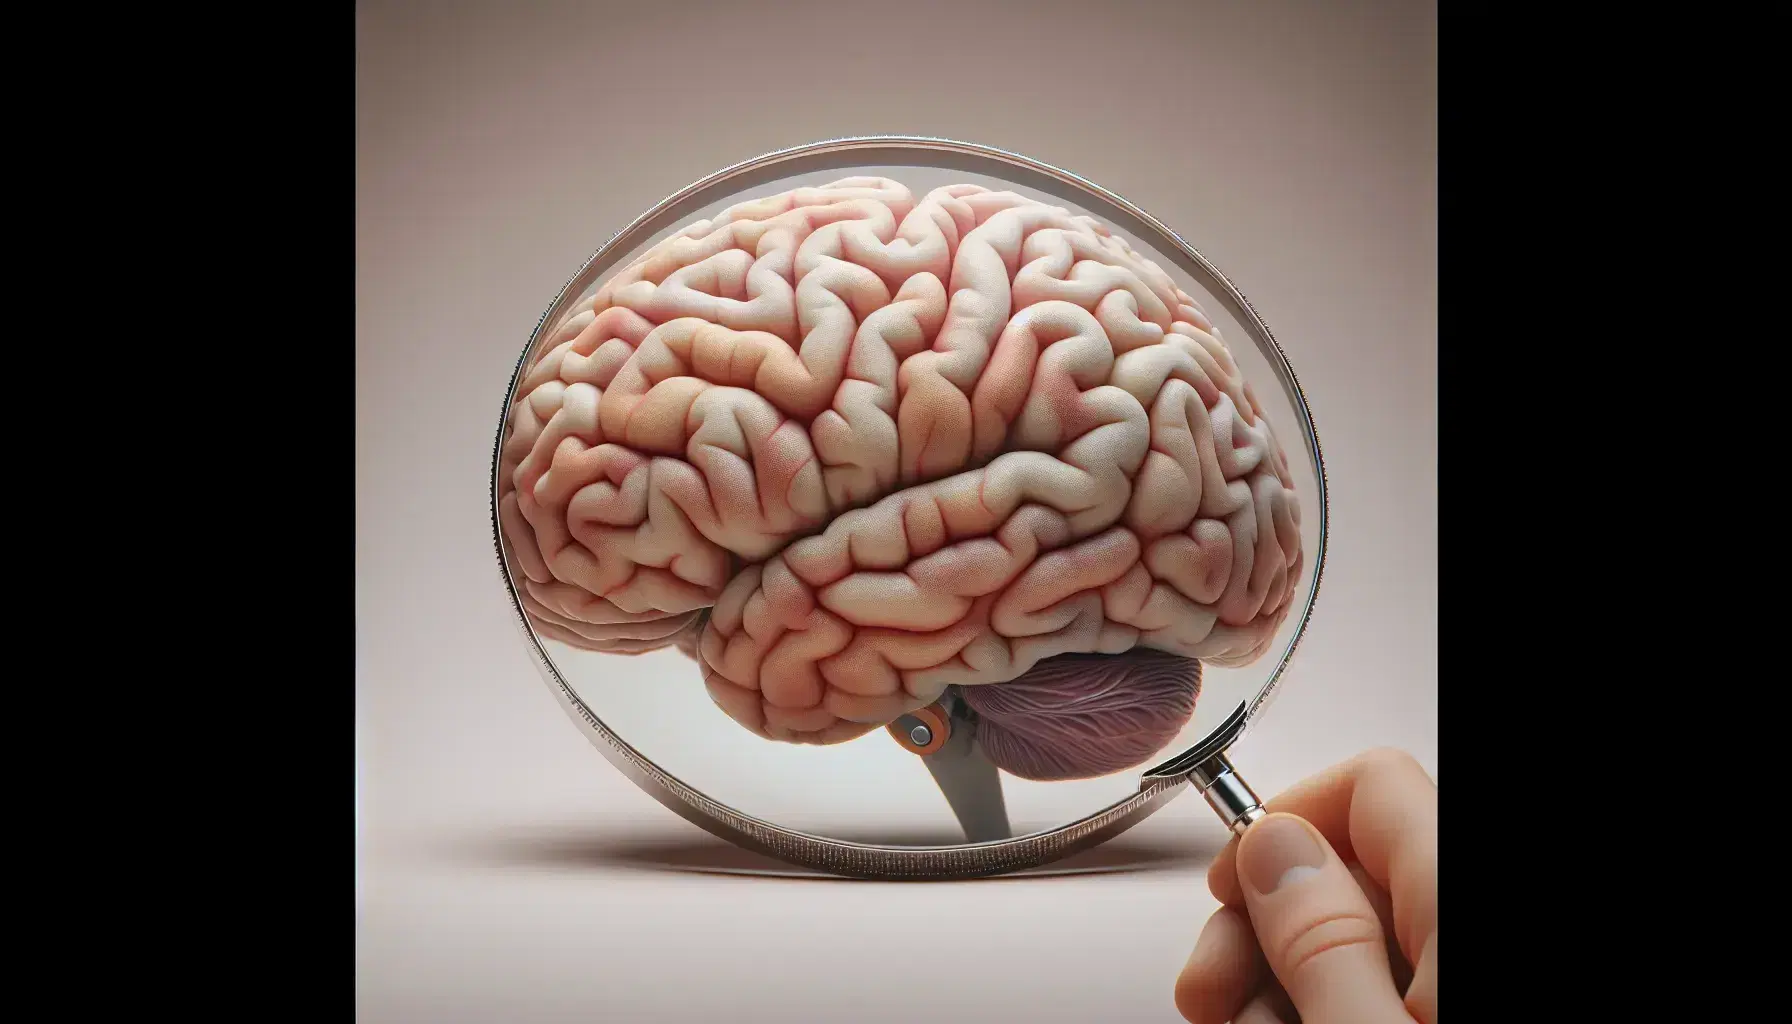 Detailed anatomical model of a human brain with temporal lobe magnified through a magnifying glass, on neutral background.